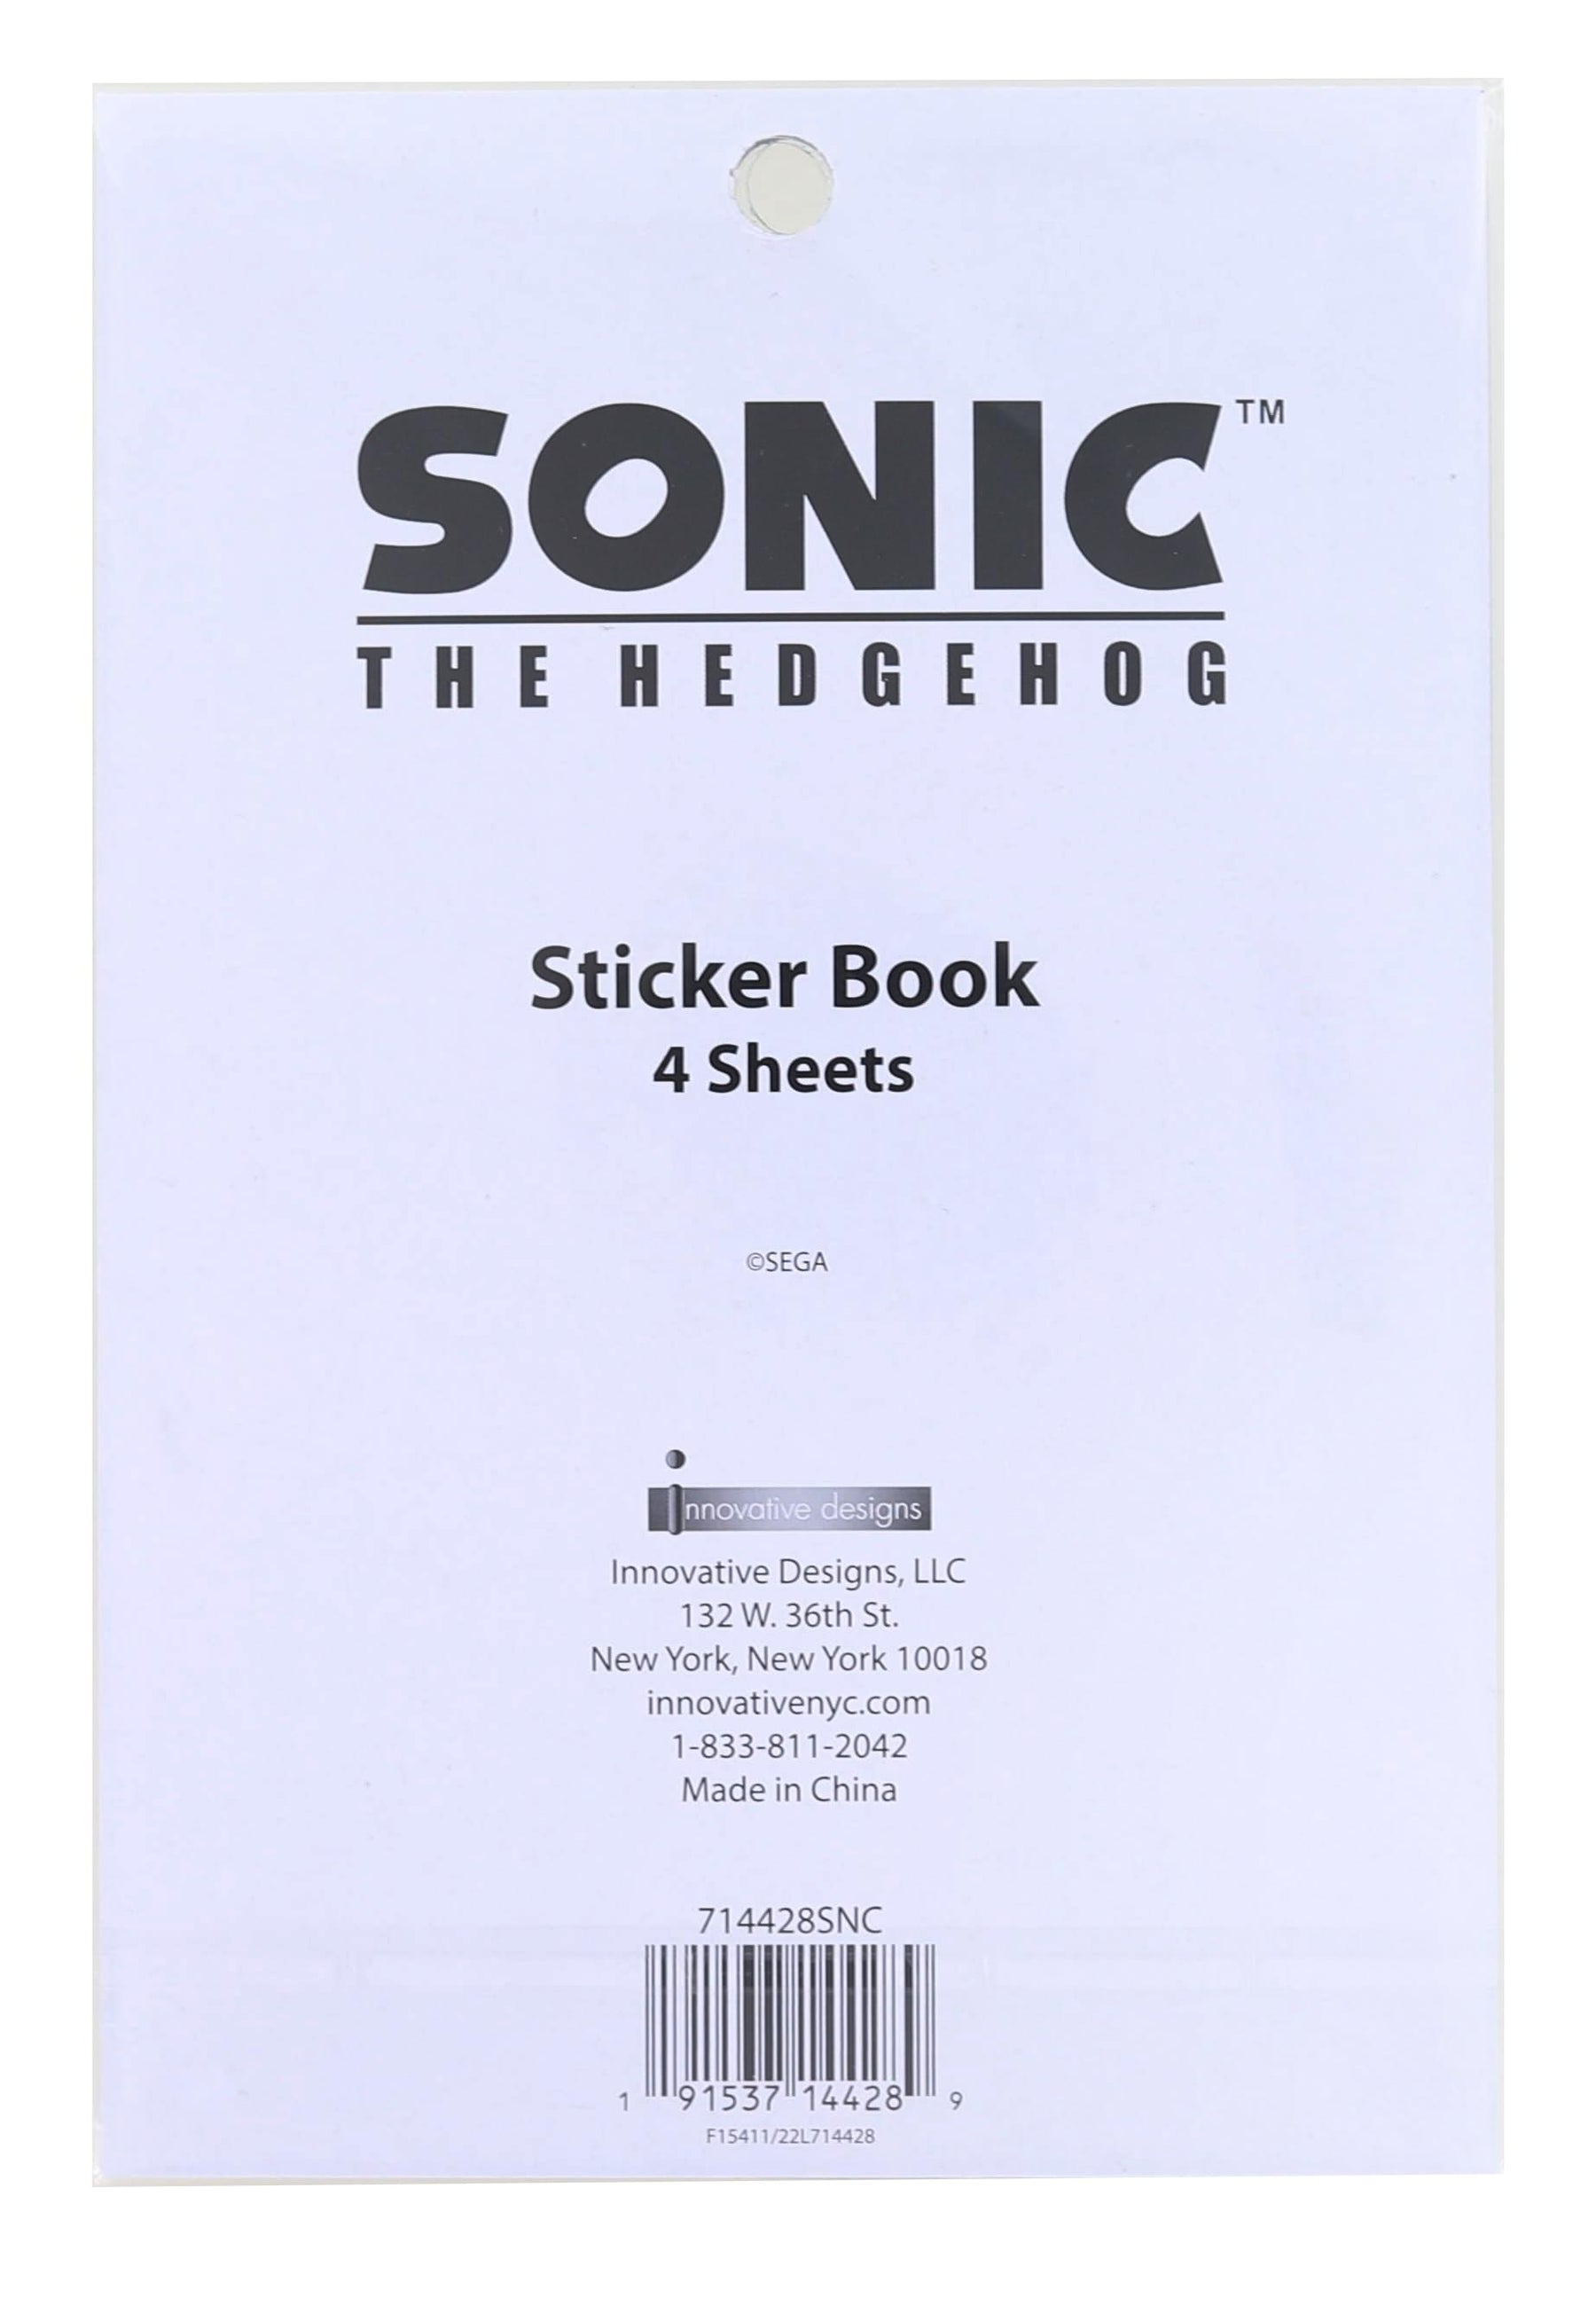 Sonic the Hedgehog Sticker Book | 4 Sheets | Over 300 Stickers